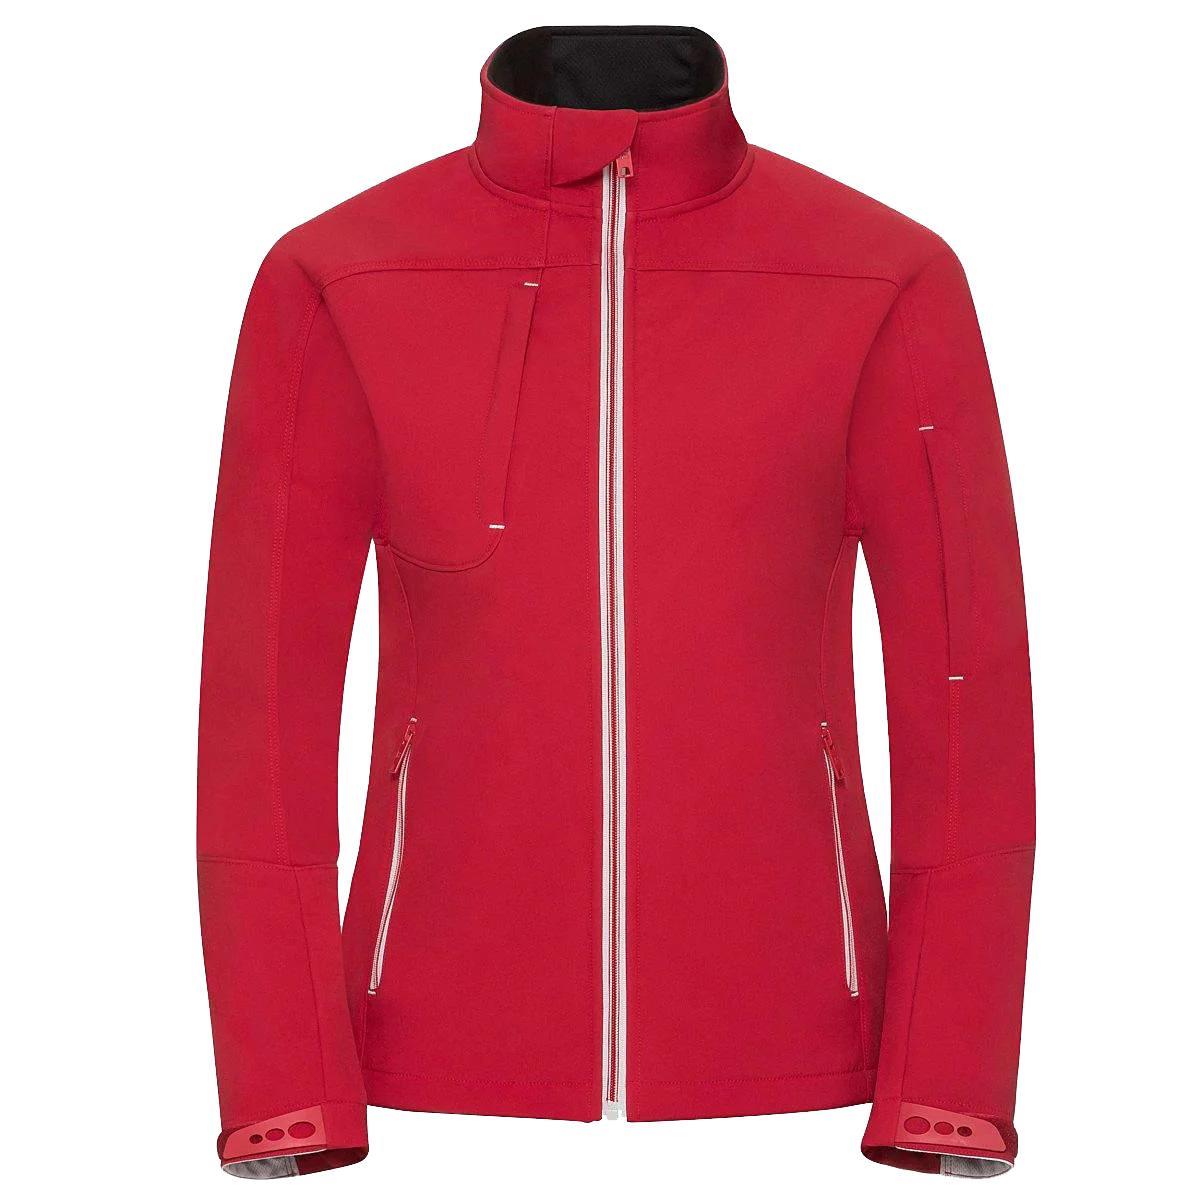 Russell Women/Ladies Bionic Softshell Jacket (Classic Red) (3XL)